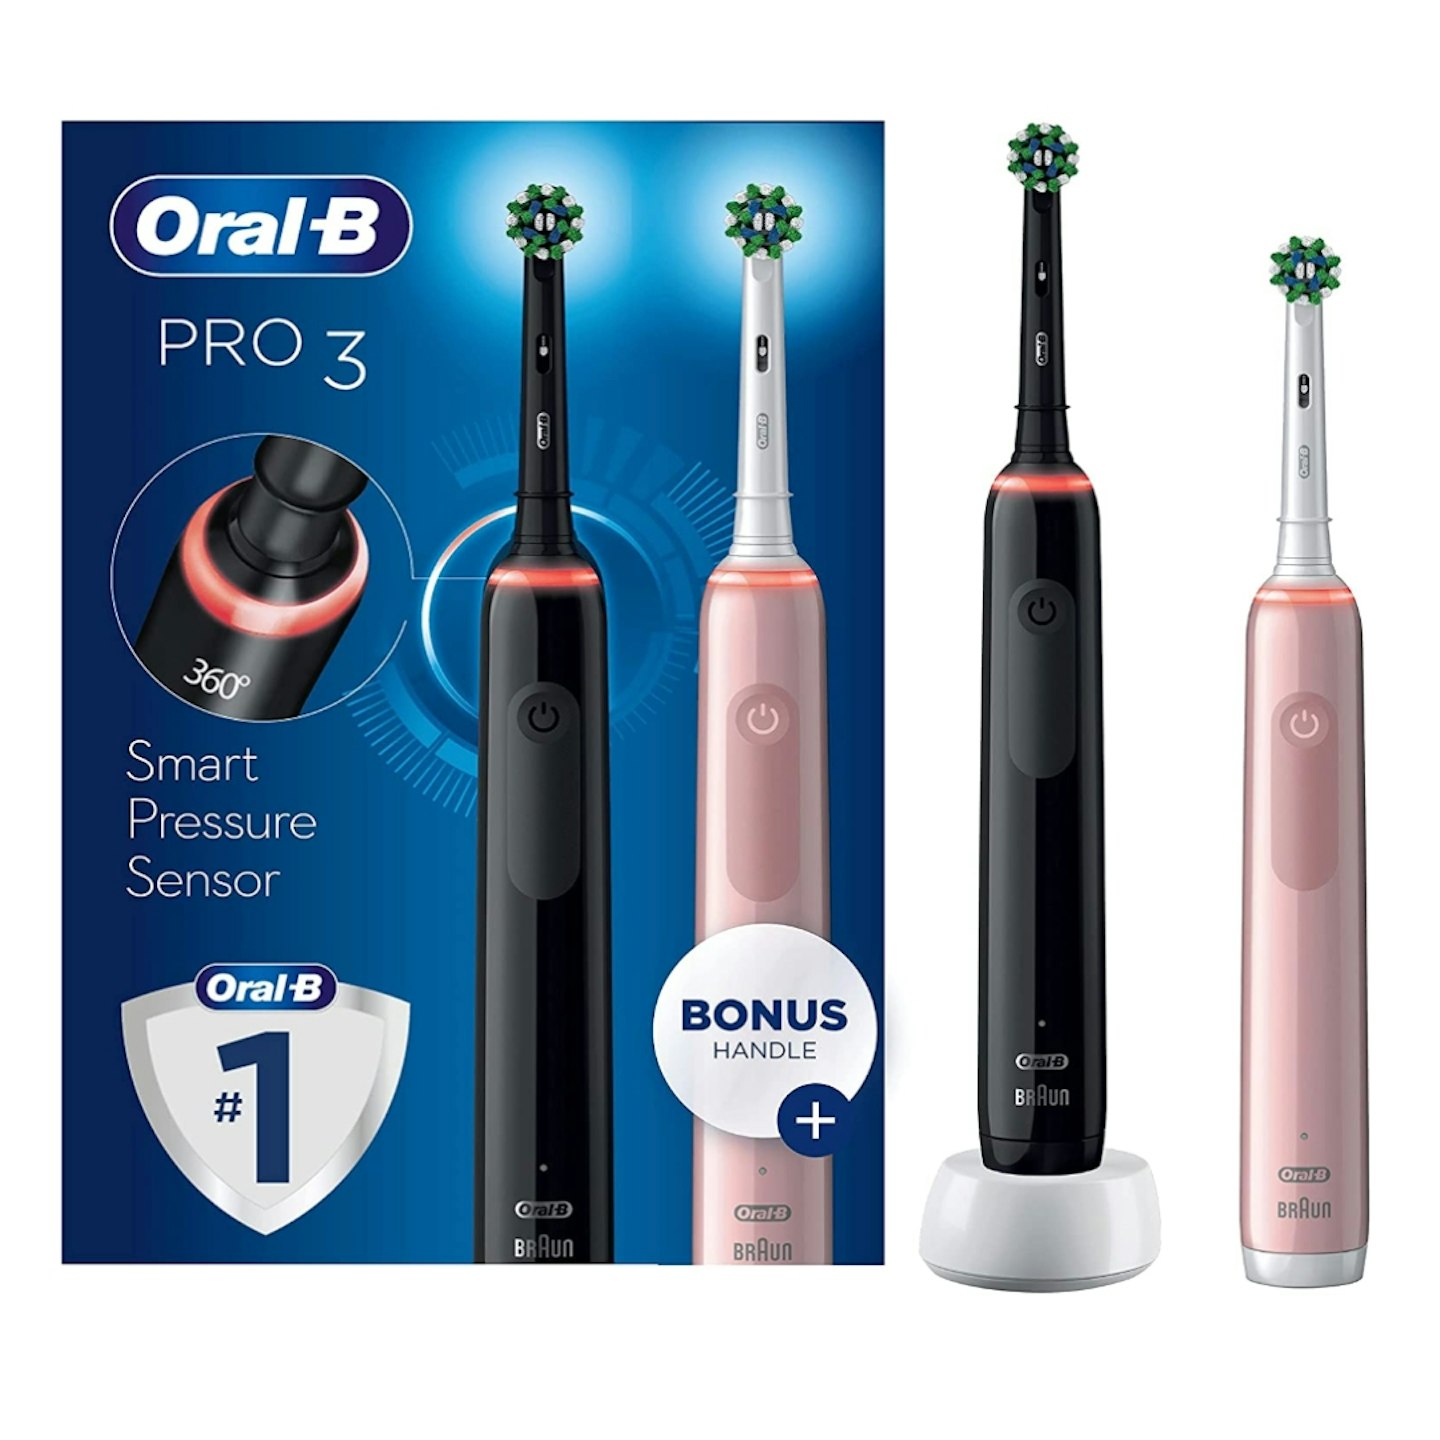 Oral-B Pro 3 2x Electric Toothbrushes with Smart Pressure Sensor